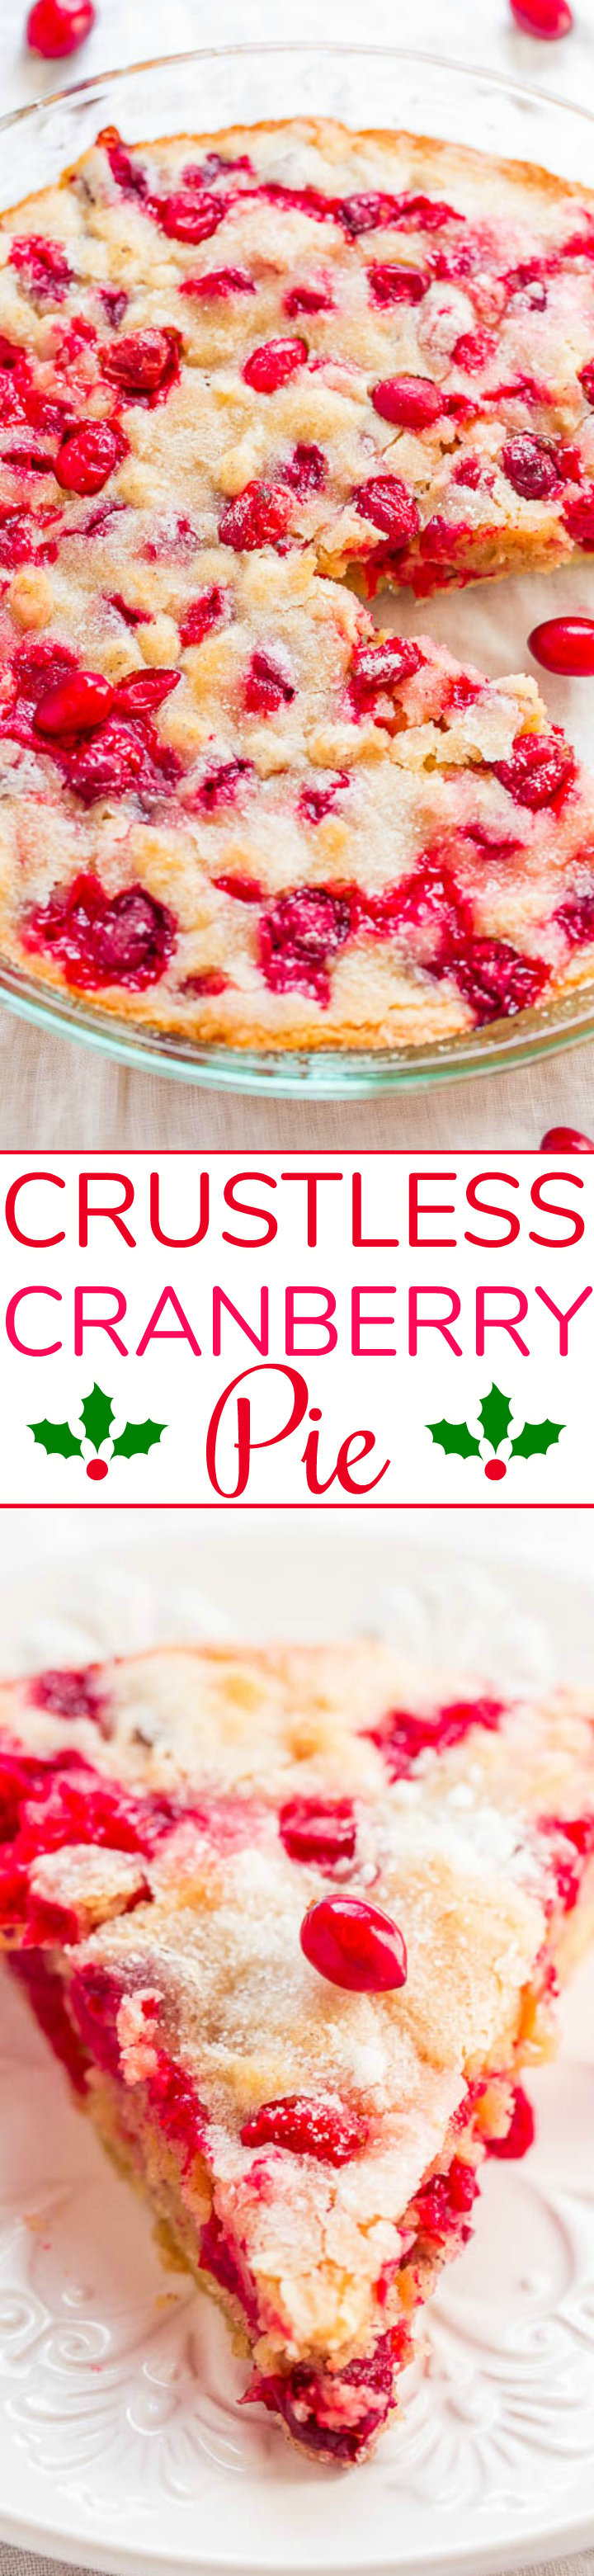 Crustless Cranberry Pie - FAST, super EASY, no-mixer dessert that's perfect for holiday entertaining!! Somewhere in between pie, cake, and blondies is what you get with this FESTIVE recipe! Take advantage of those fresh cranberries!!